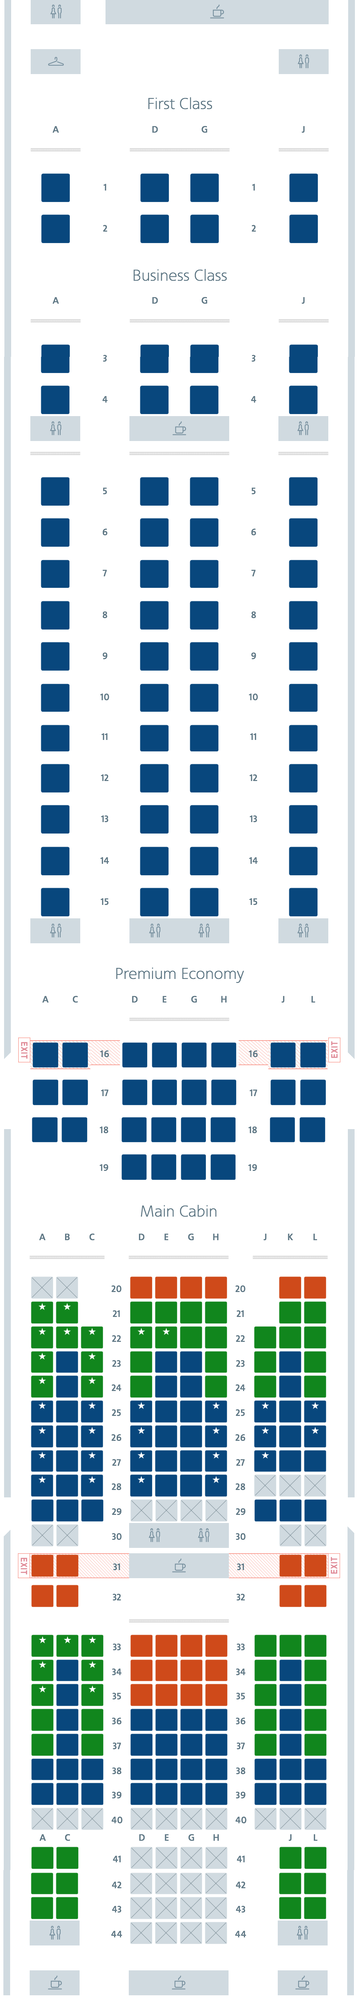 American Airlines Aircraft 772 Seat Map | Review Home Decor